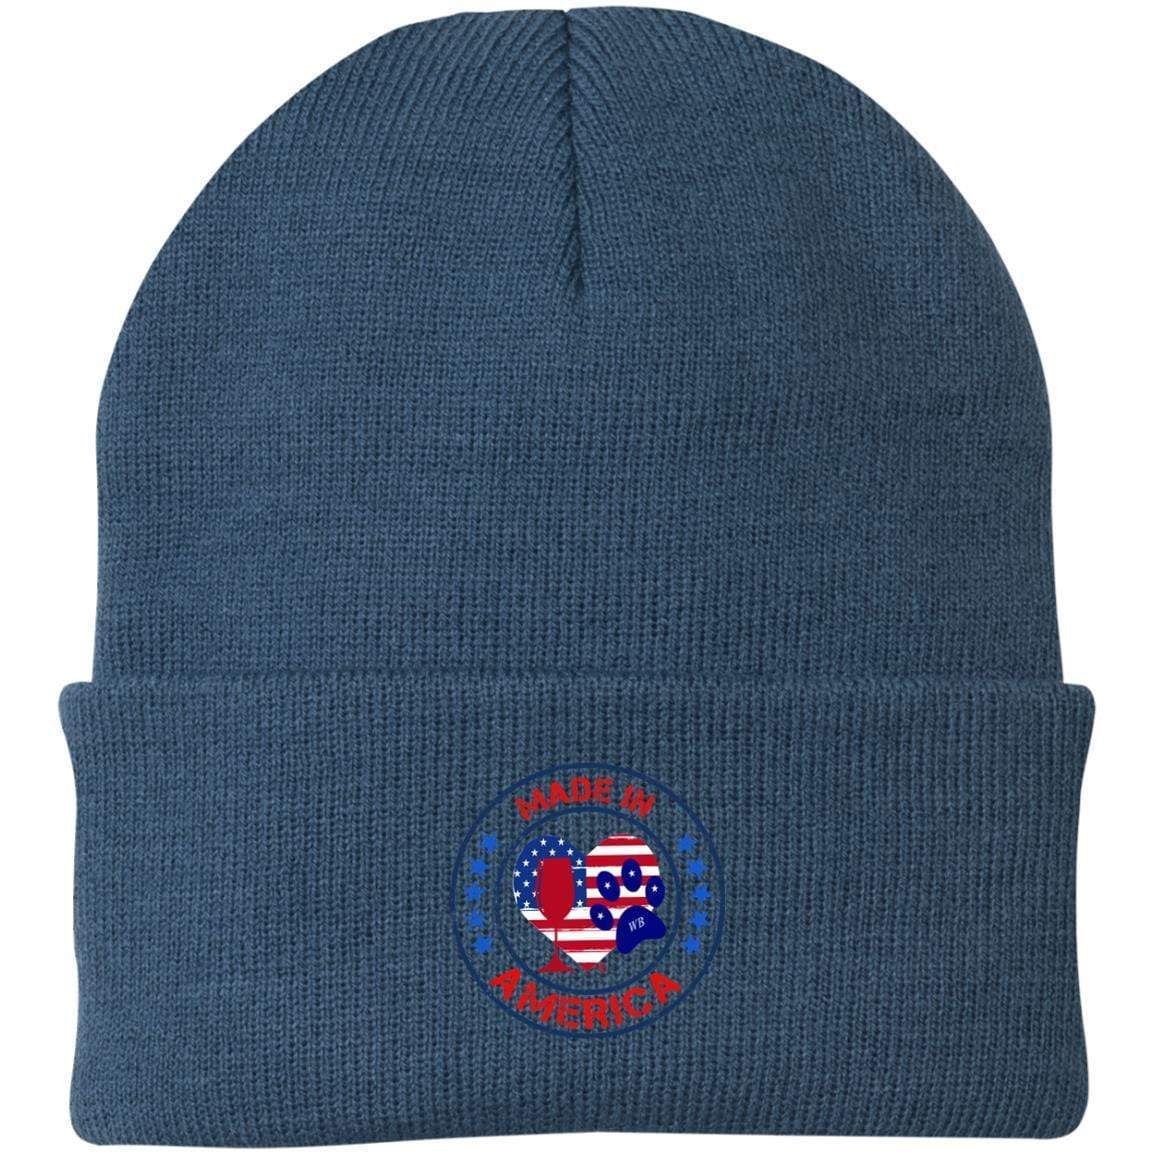 Hats Millennium Blue / One Size Winey Bitches Co "Made In America" Embroidered Knit Cap WineyBitchesCo